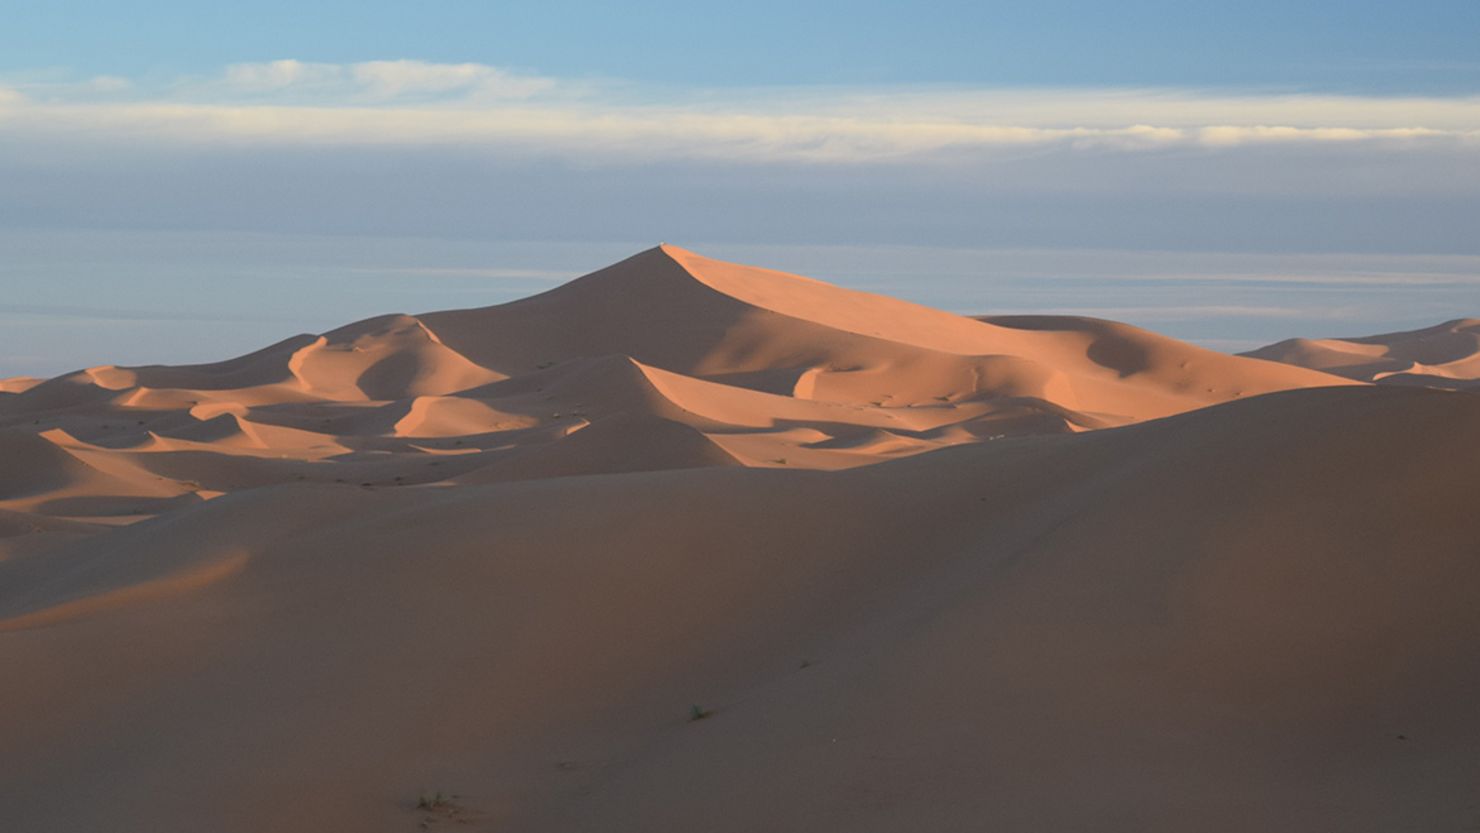 In the Sahara Desert's Erg Chebbi region in Morocco, sands deposited atop the base of the Lala Lallia star dune accumulated rapidly, with most of the growth taking place over the past 1,000 years.